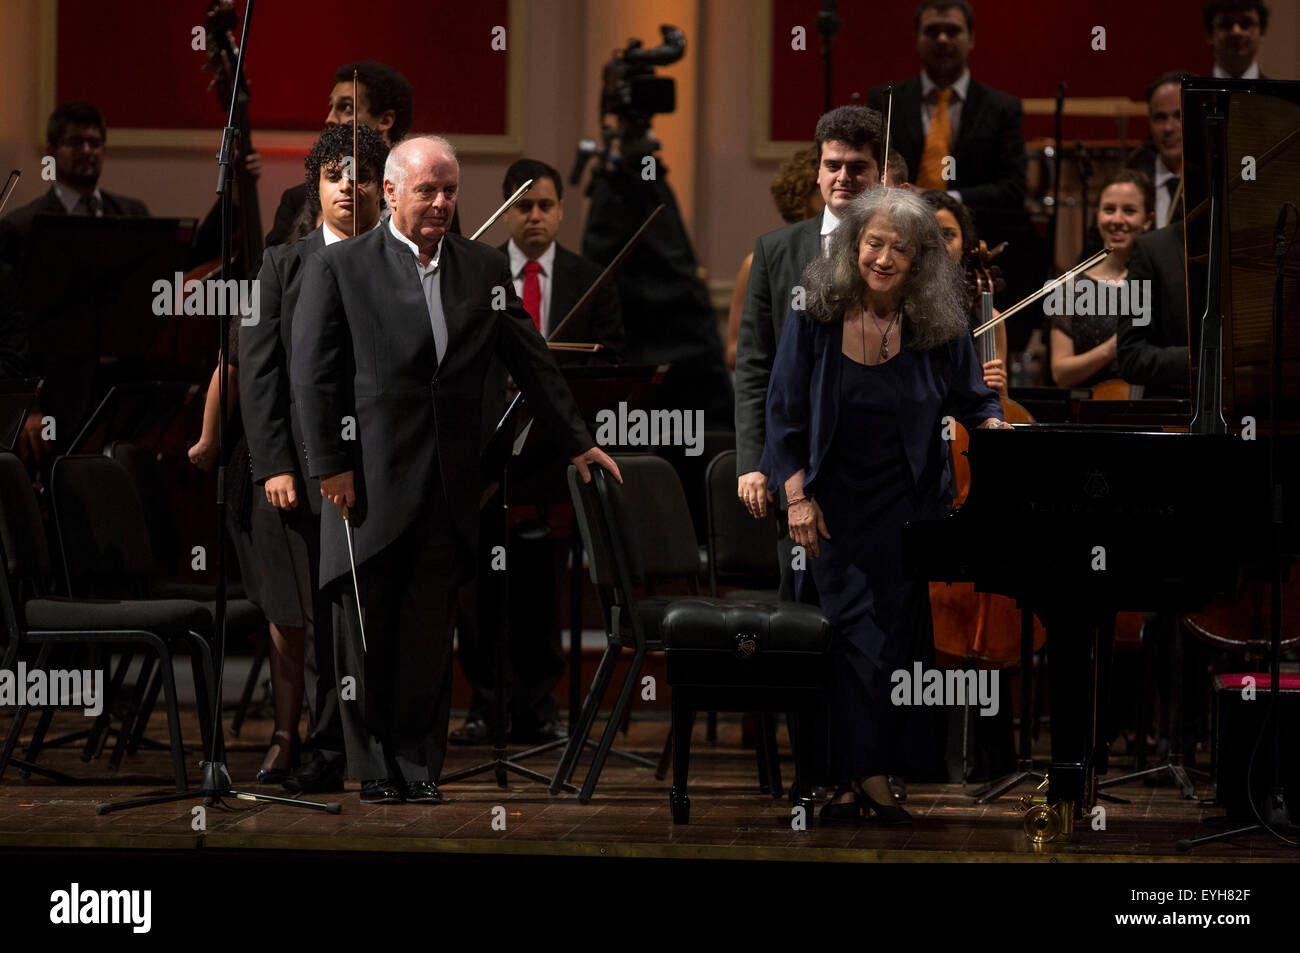 Buenos Aires, Argentina. 29th July, 2015. Argentinean Musician and orchestra conductor Daniel Barenboim (L) and pianist Martha Argerich (R) respond to the applause during a concert held with the West-Eastern Divan Orchestra at the Colon Theater, in Buenos Aires, capital of Argentina, July 29, 2015. © Martin Zabala/Xinhua/Alamy Live News Stock Photo